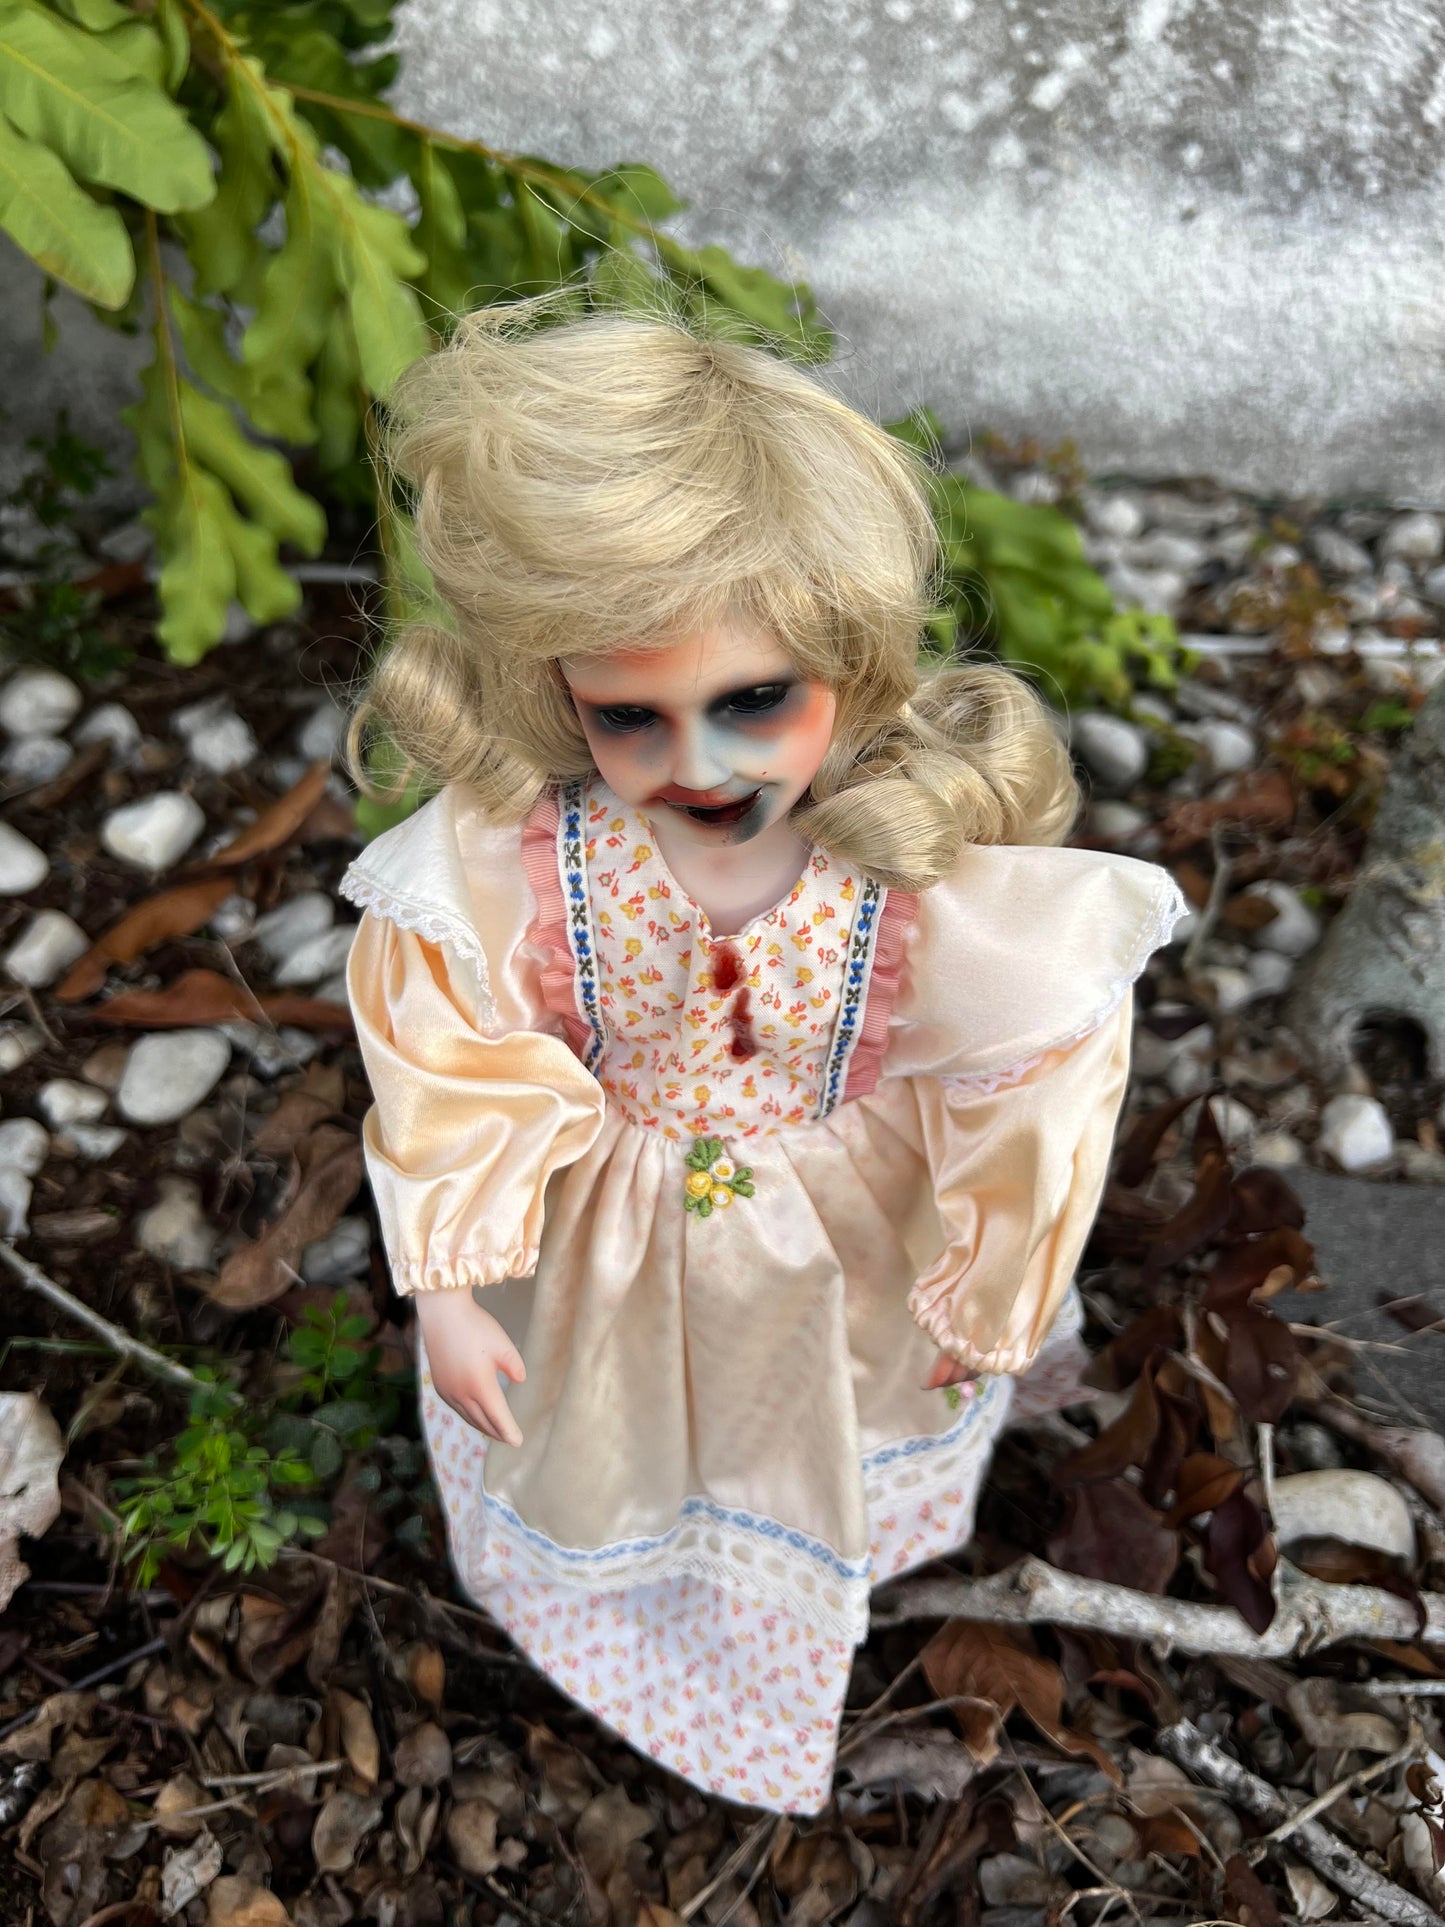 Meet Gretchen 14" Vintage Baby Porcelain witchy Creepy Haunted Spirit Infected Zombie Doll Scary Poltergeist Halloween Spooky Hand Painted